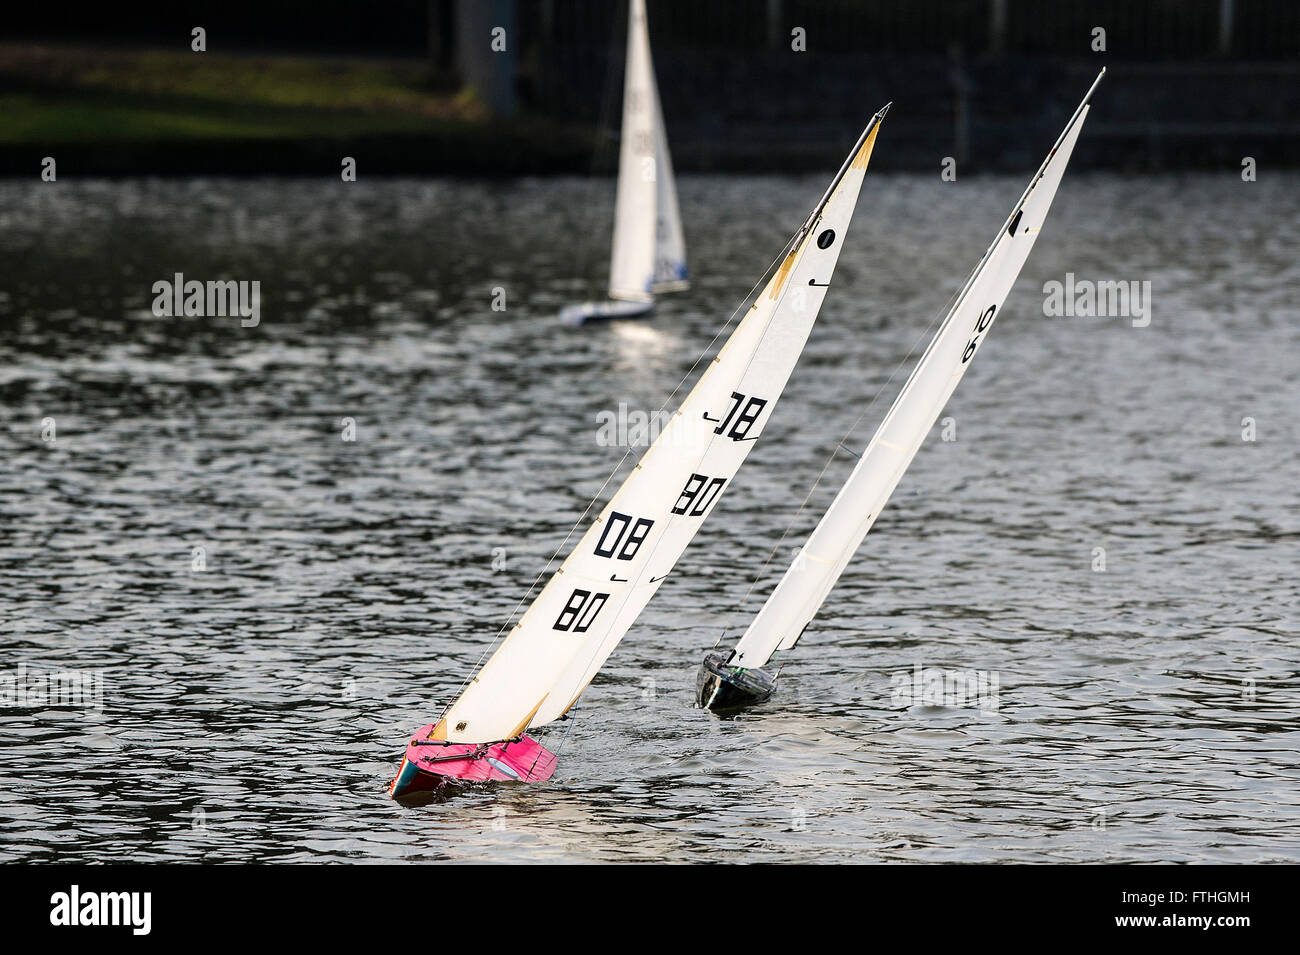 Model yachts racing on Trenance Lake in Newquay, Cornwall. Stock Photo